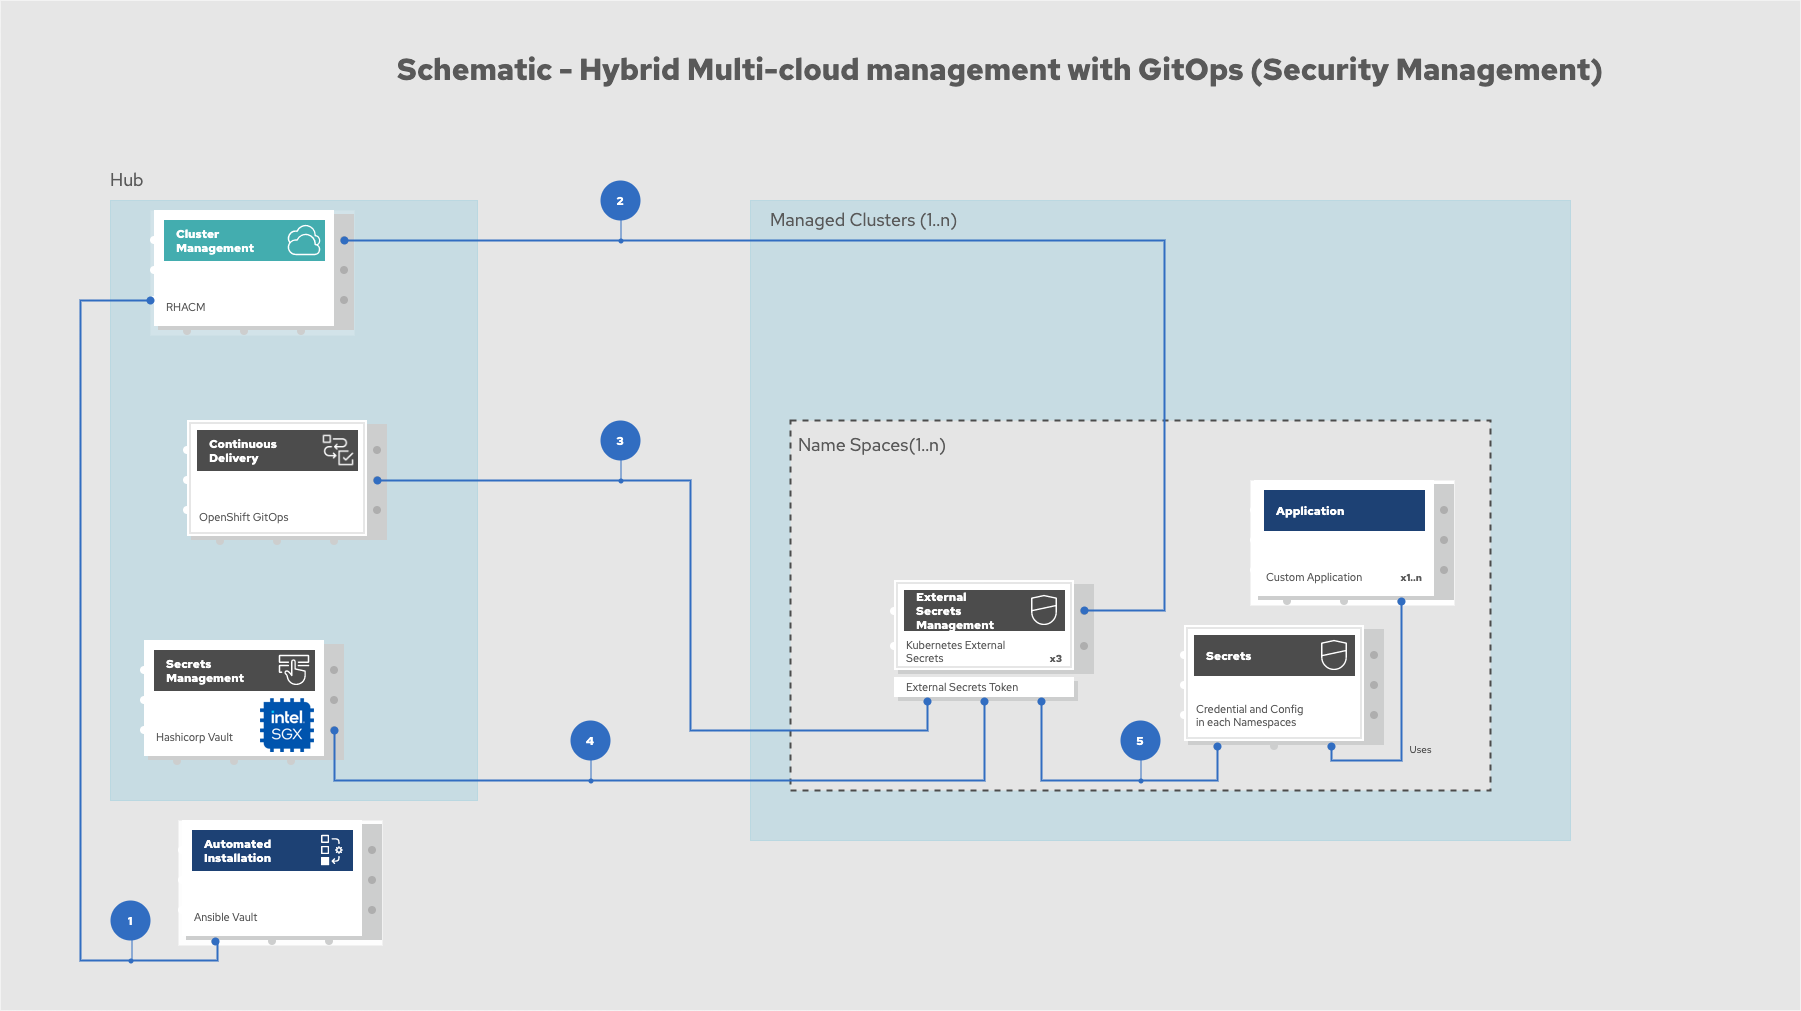 Schematic diagram of hybrid multi-cloud management with GitOps